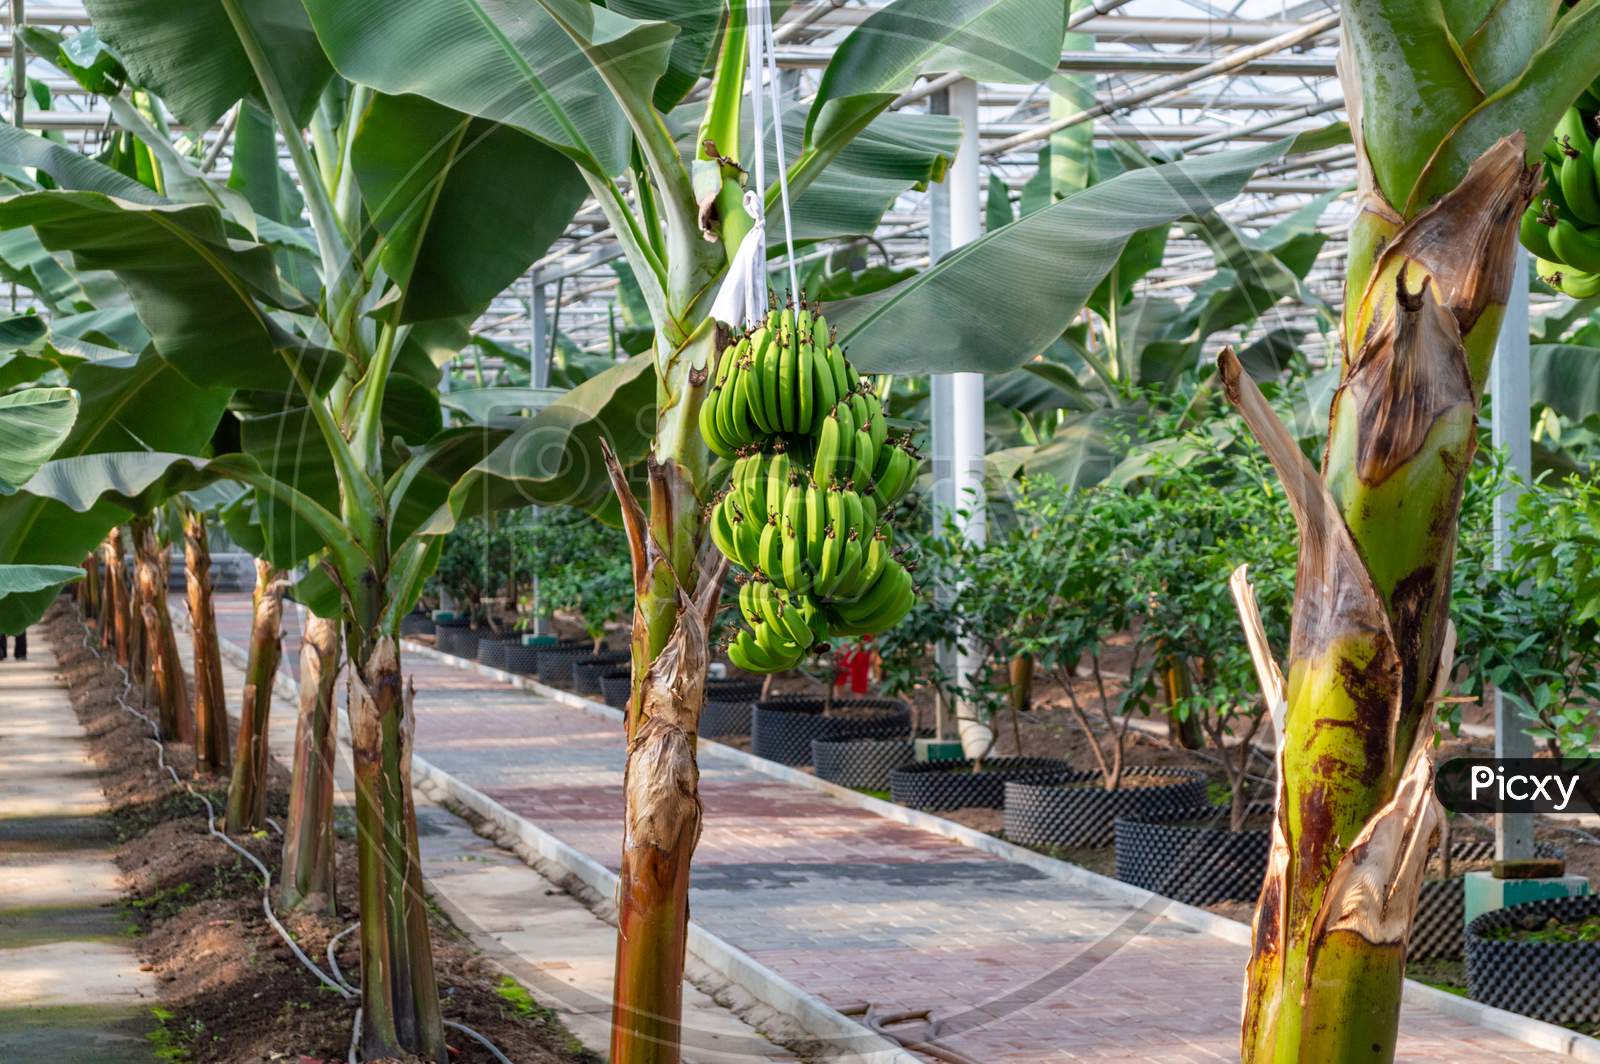 Banana Plants Growing In A Greenhouse